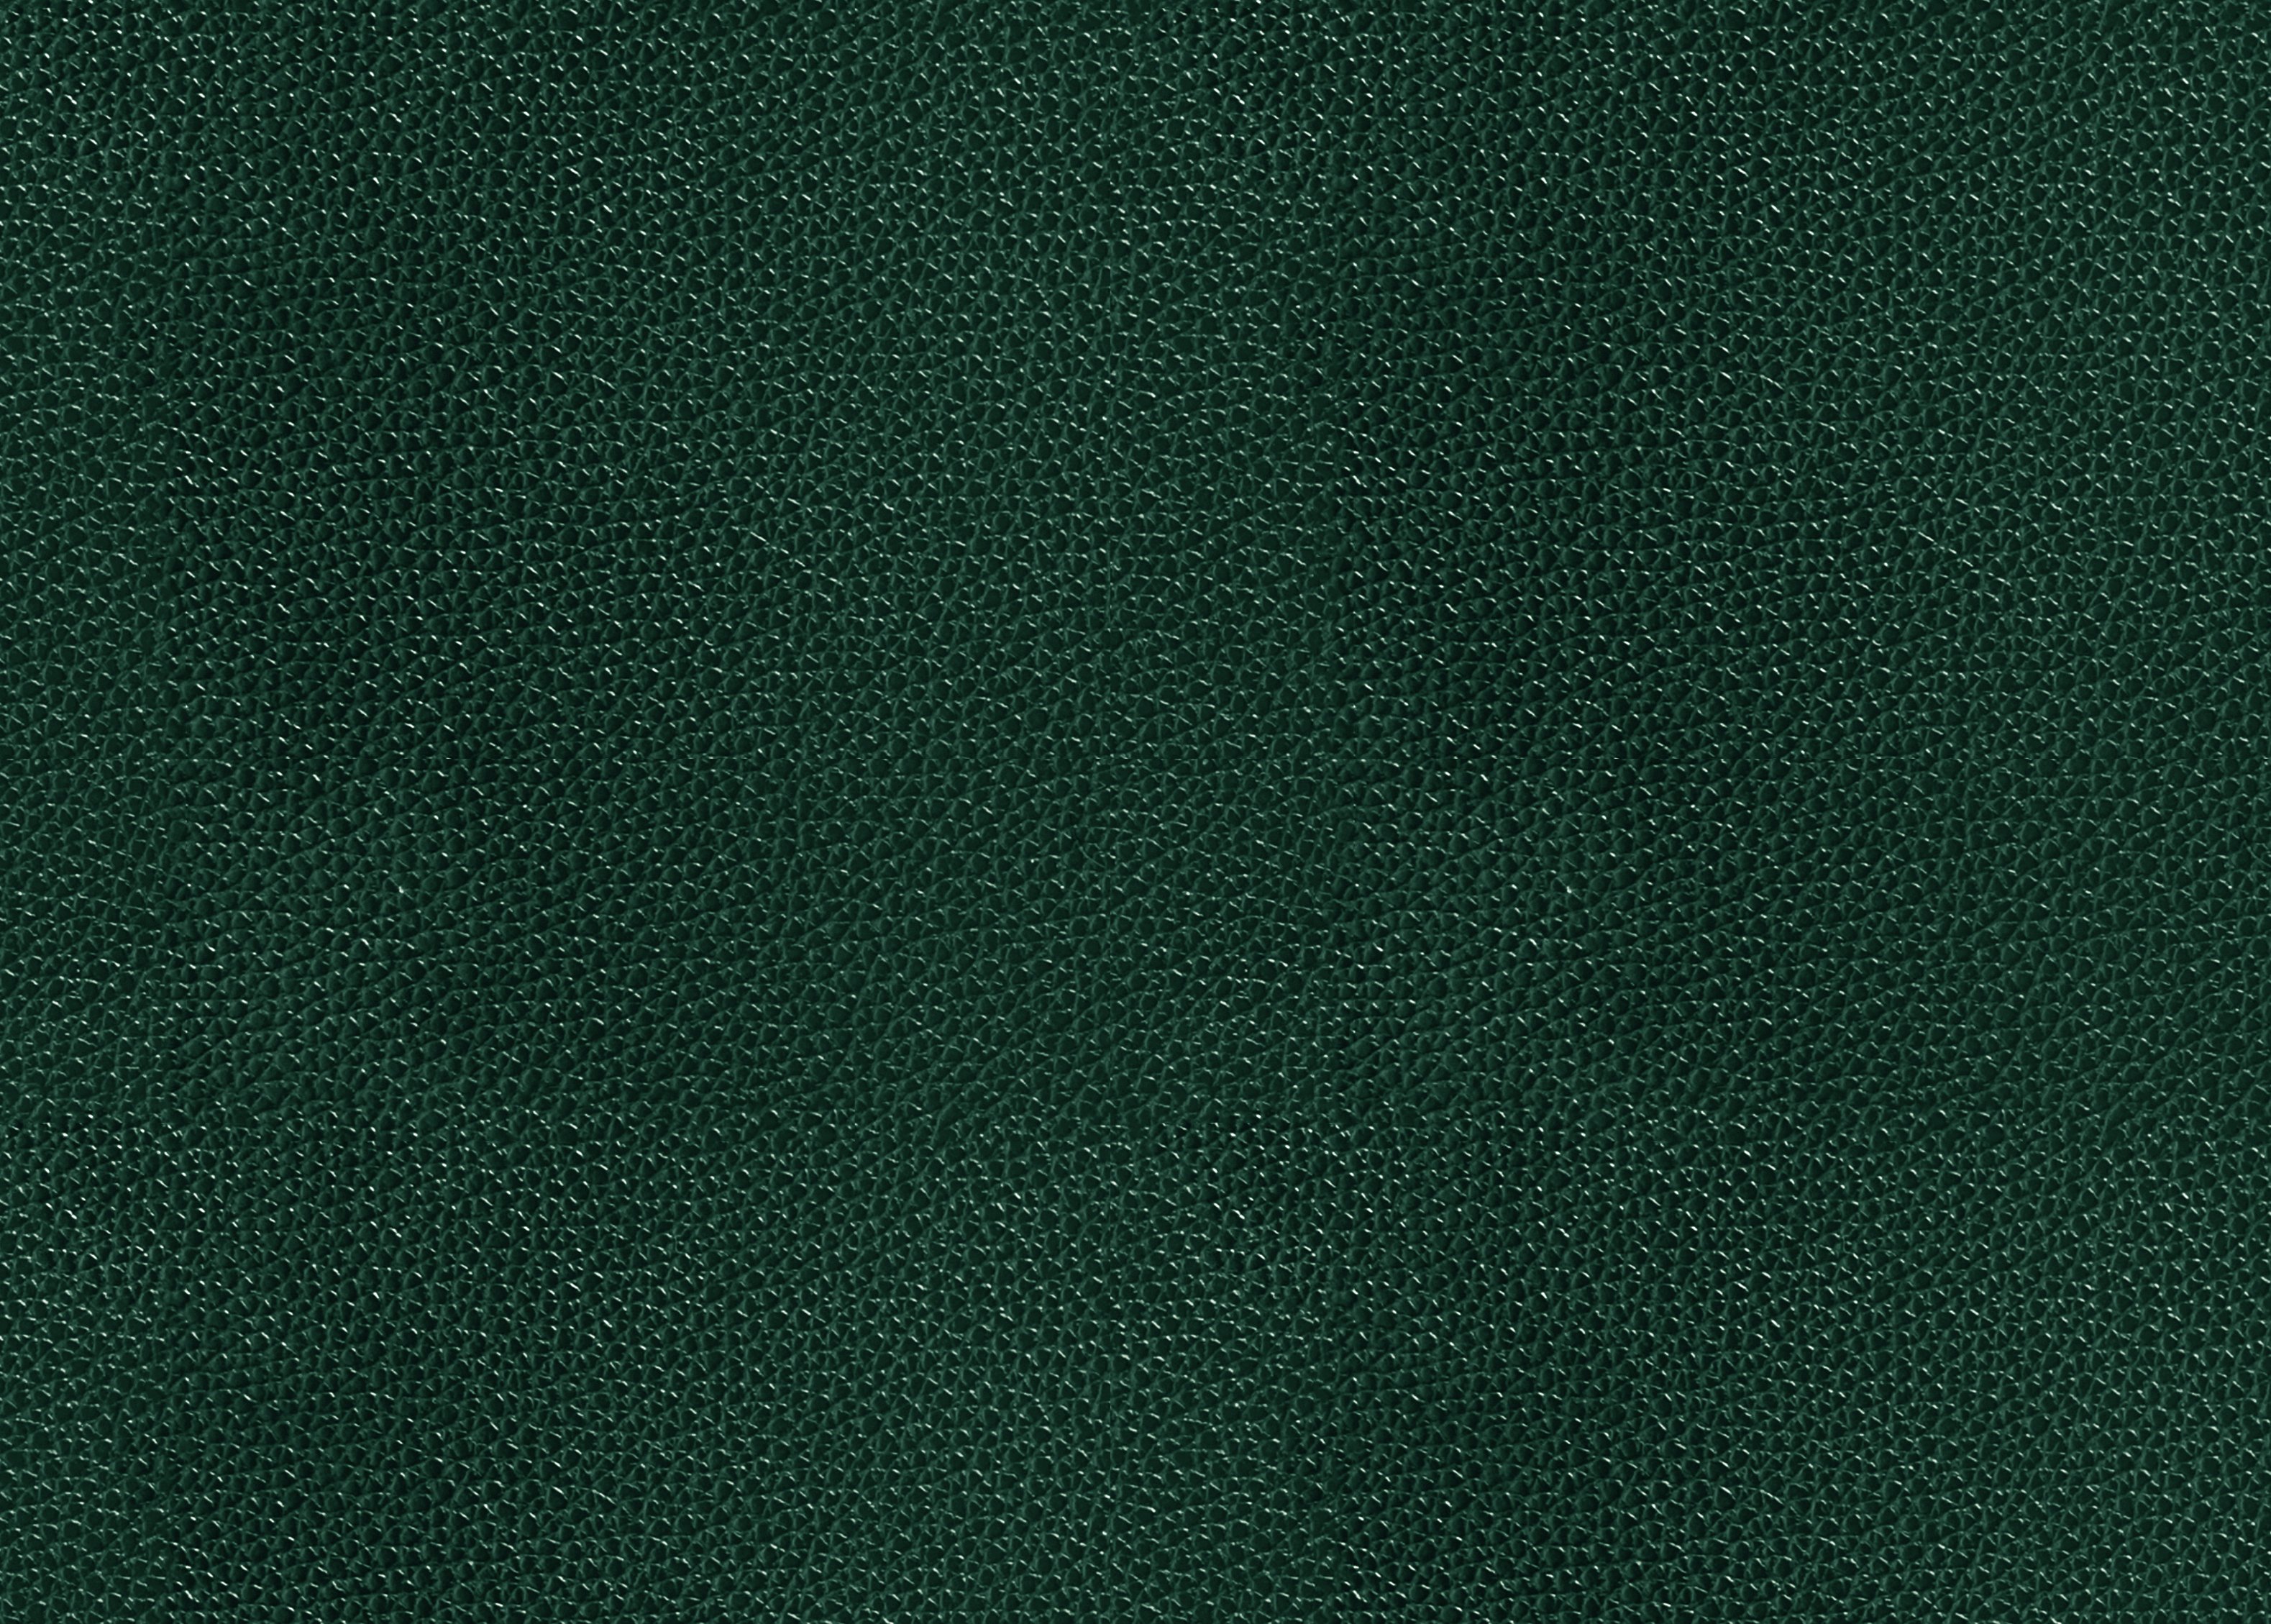 green leather texture 73